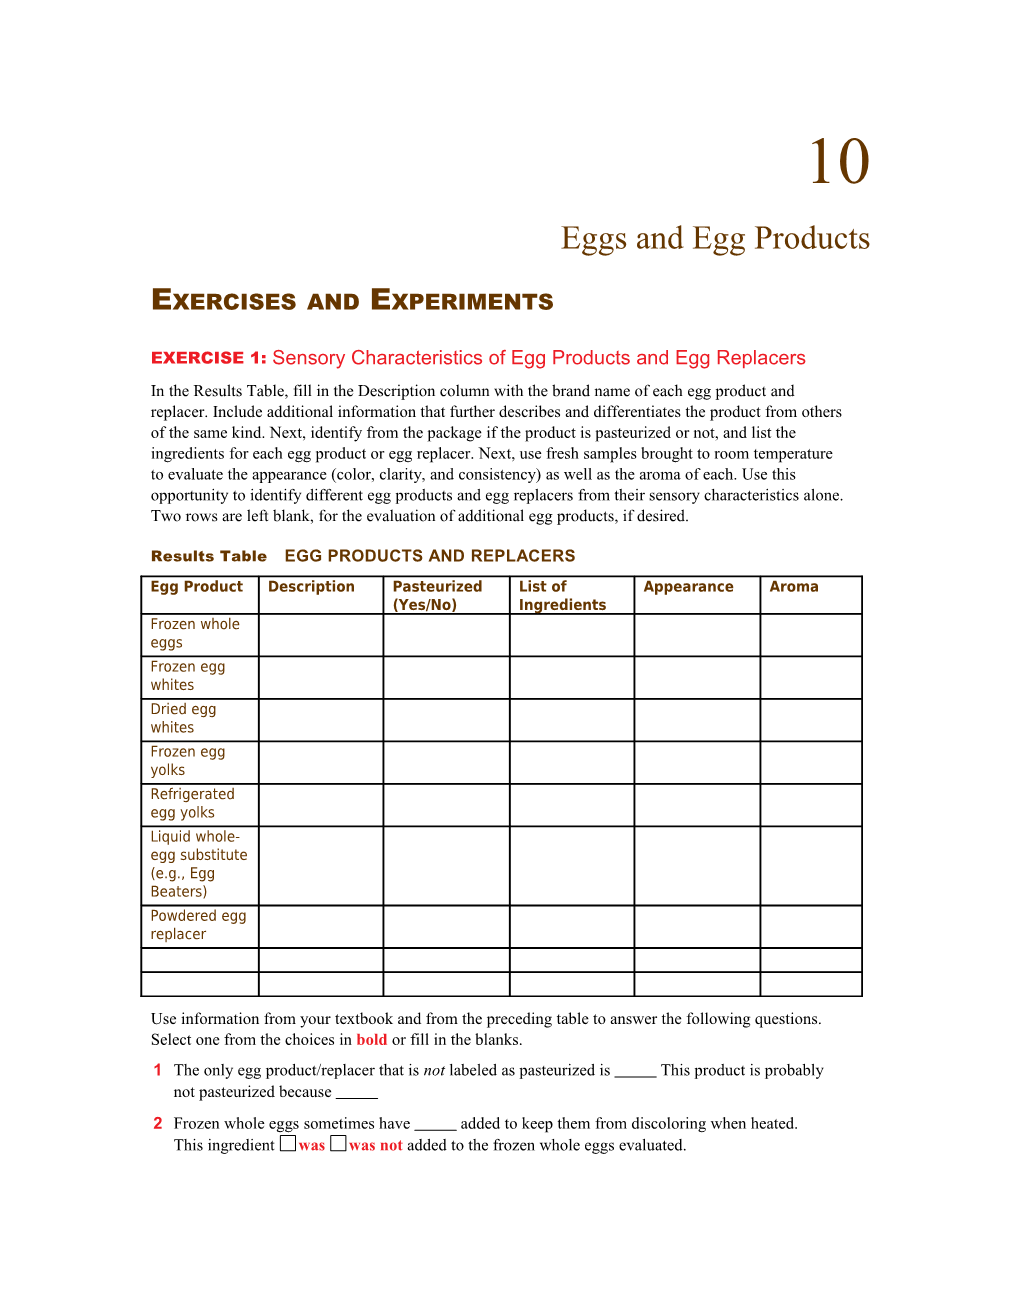 Eggs and Egg Products